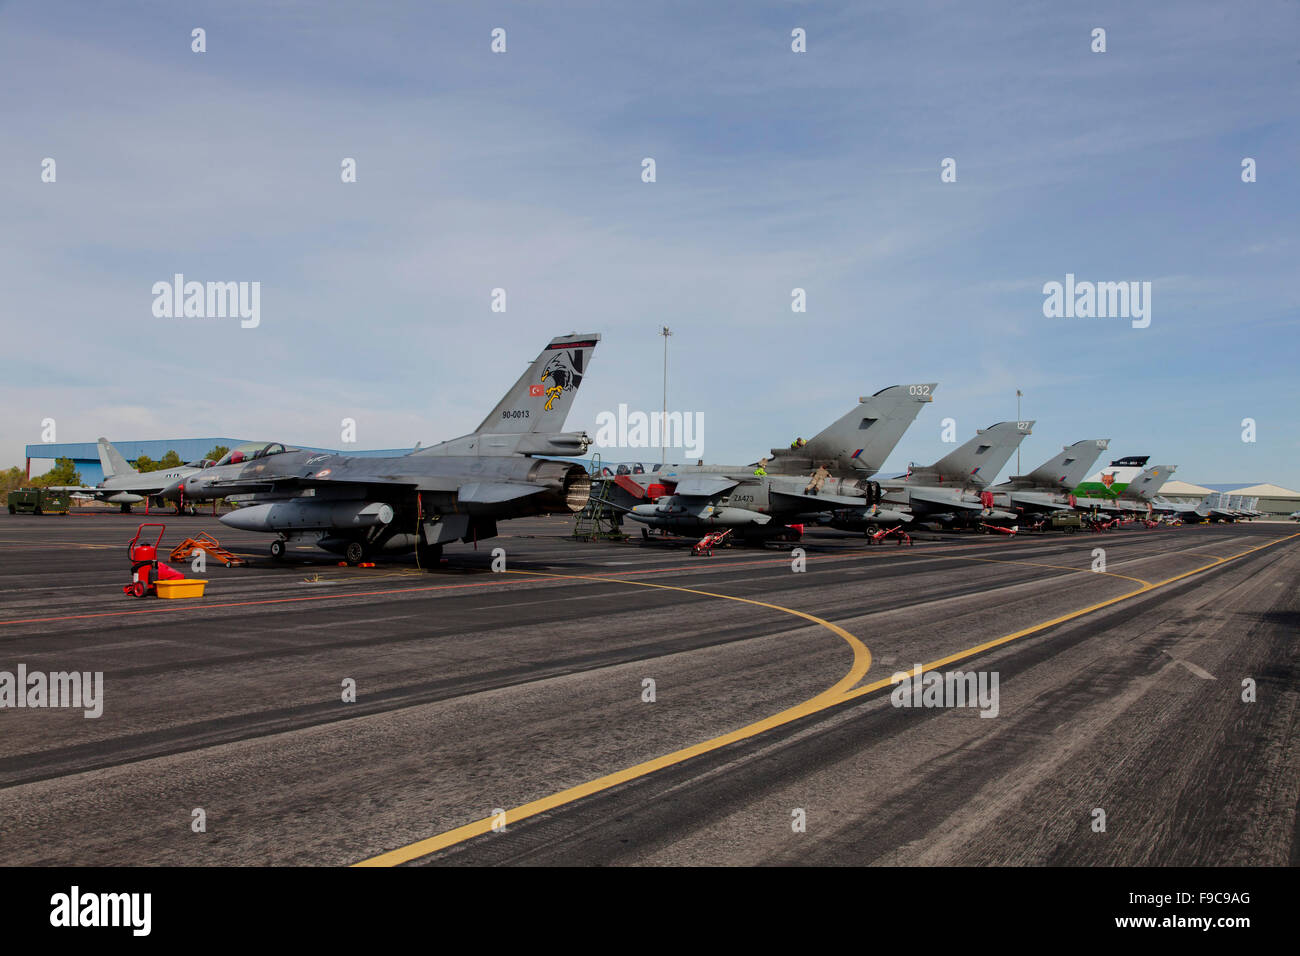 Turkish Air Force F-16 jets on the flight line during NATO's Exercise Trident Juncture, Albacete, Spain. Stock Photo